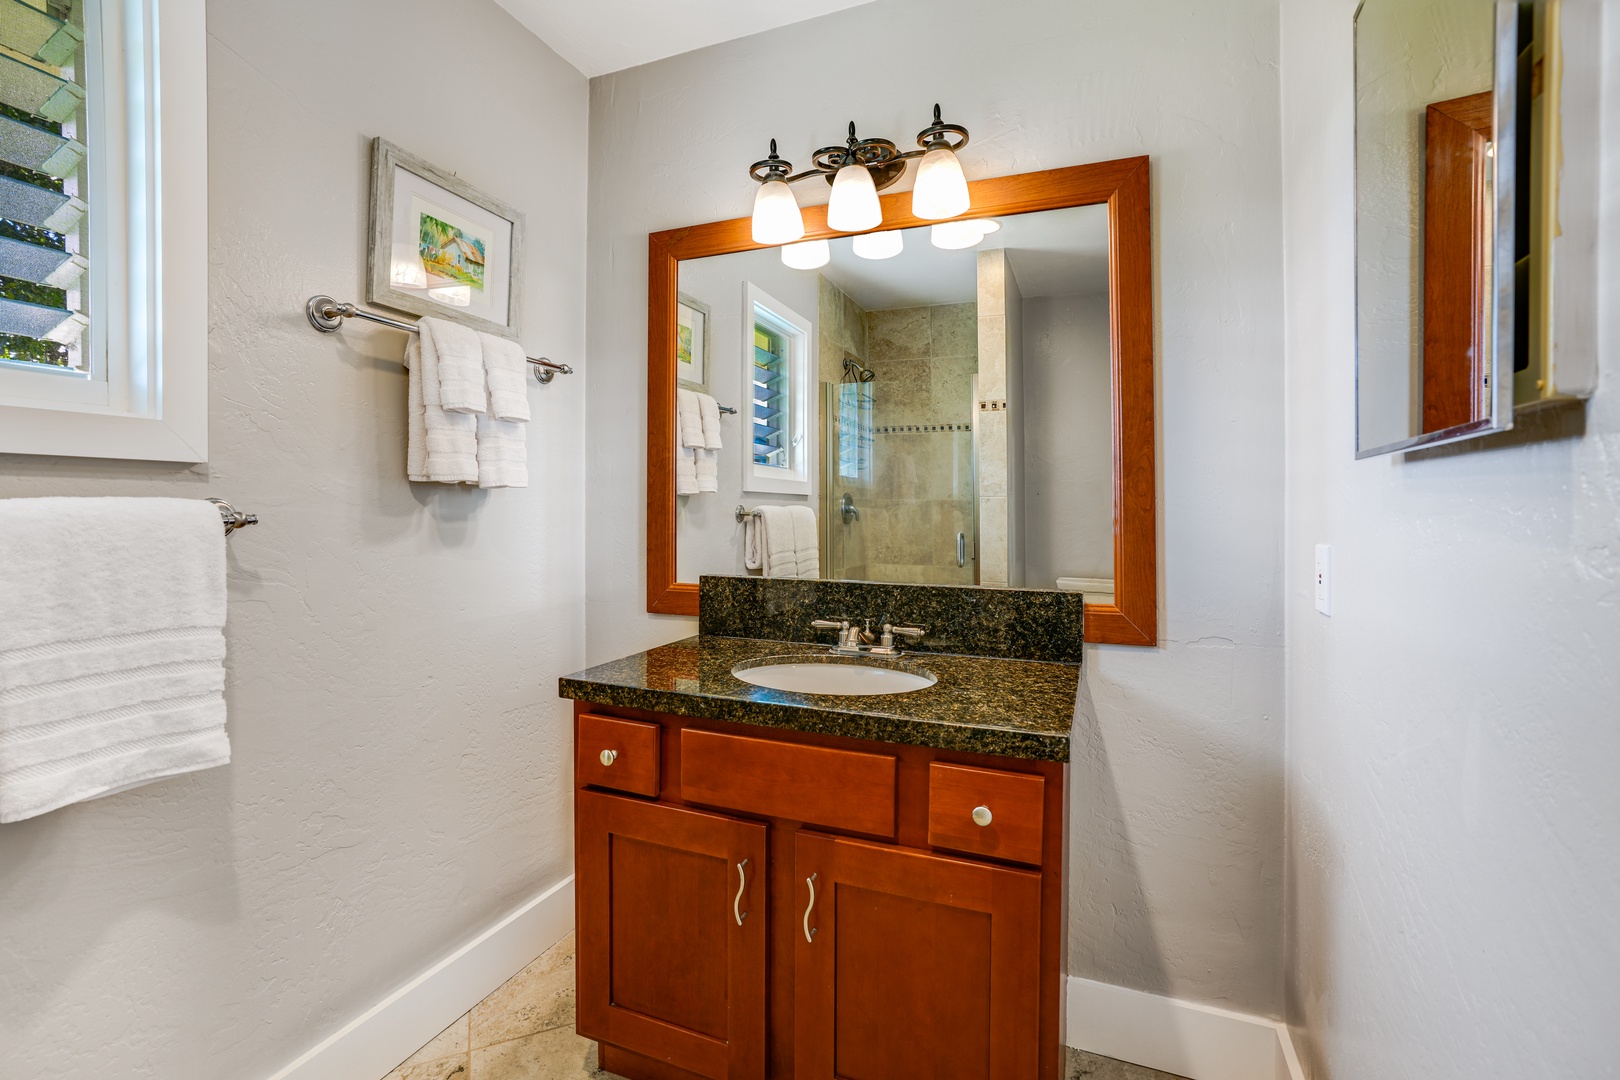 Princeville Vacation Rentals, Alii Kai 7201 - The shared bathroom across the guest bedroom, complete with all the essentials for a rejuvenating retreat.